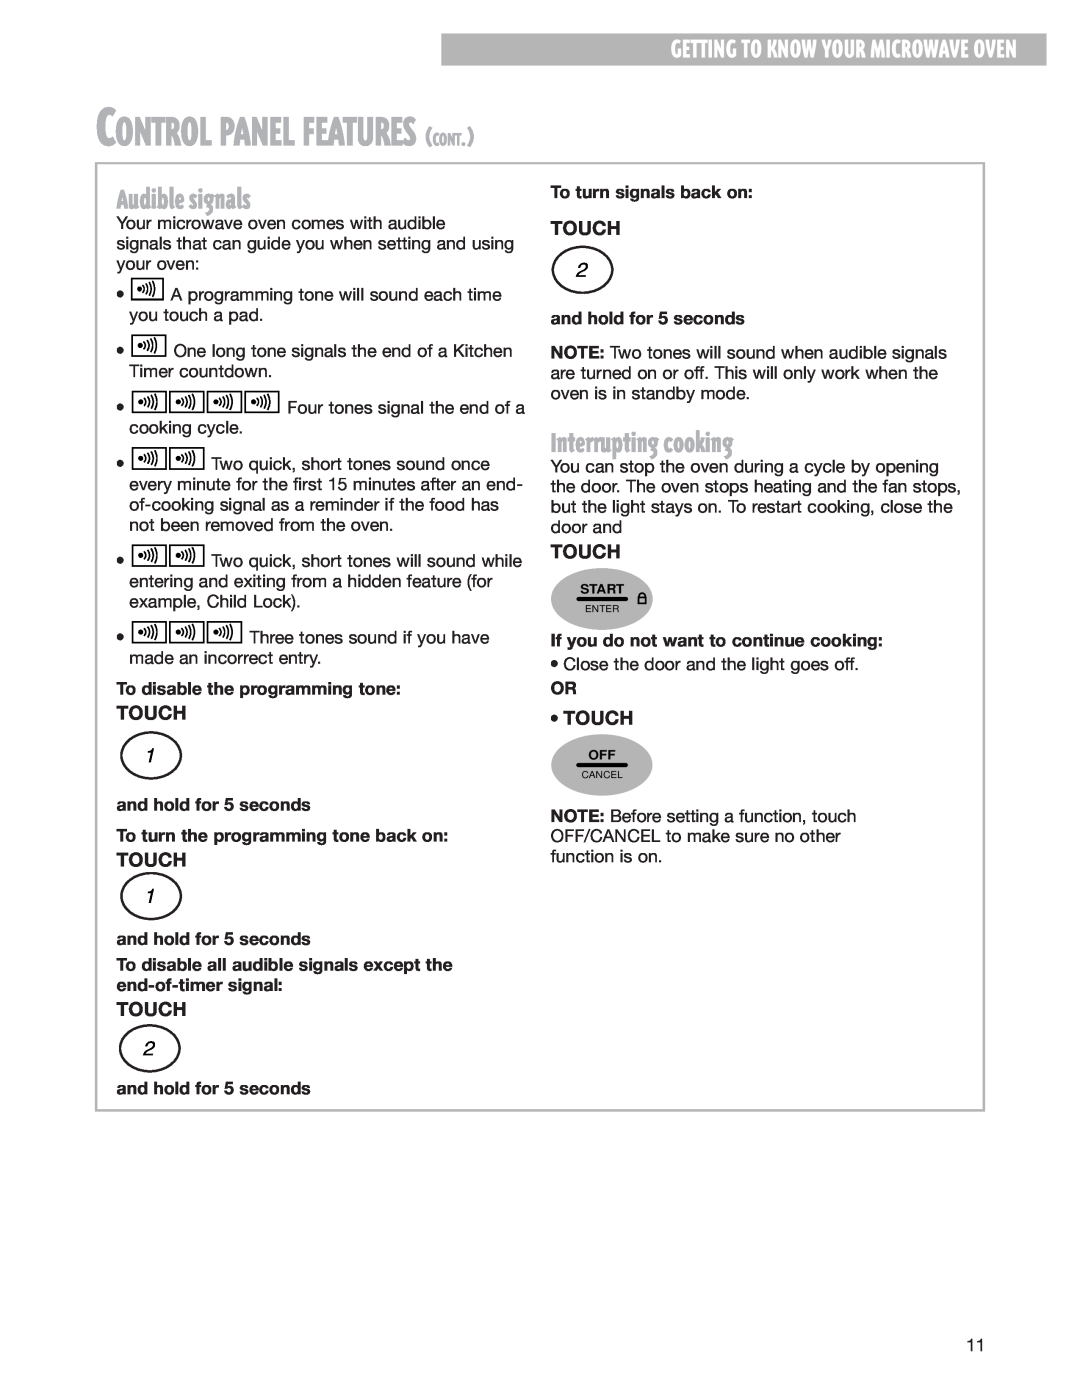 Whirlpool MH8150XJ installation instructions Control Panel Features Cont, Audible signals, Interrupting cooking, Touch 